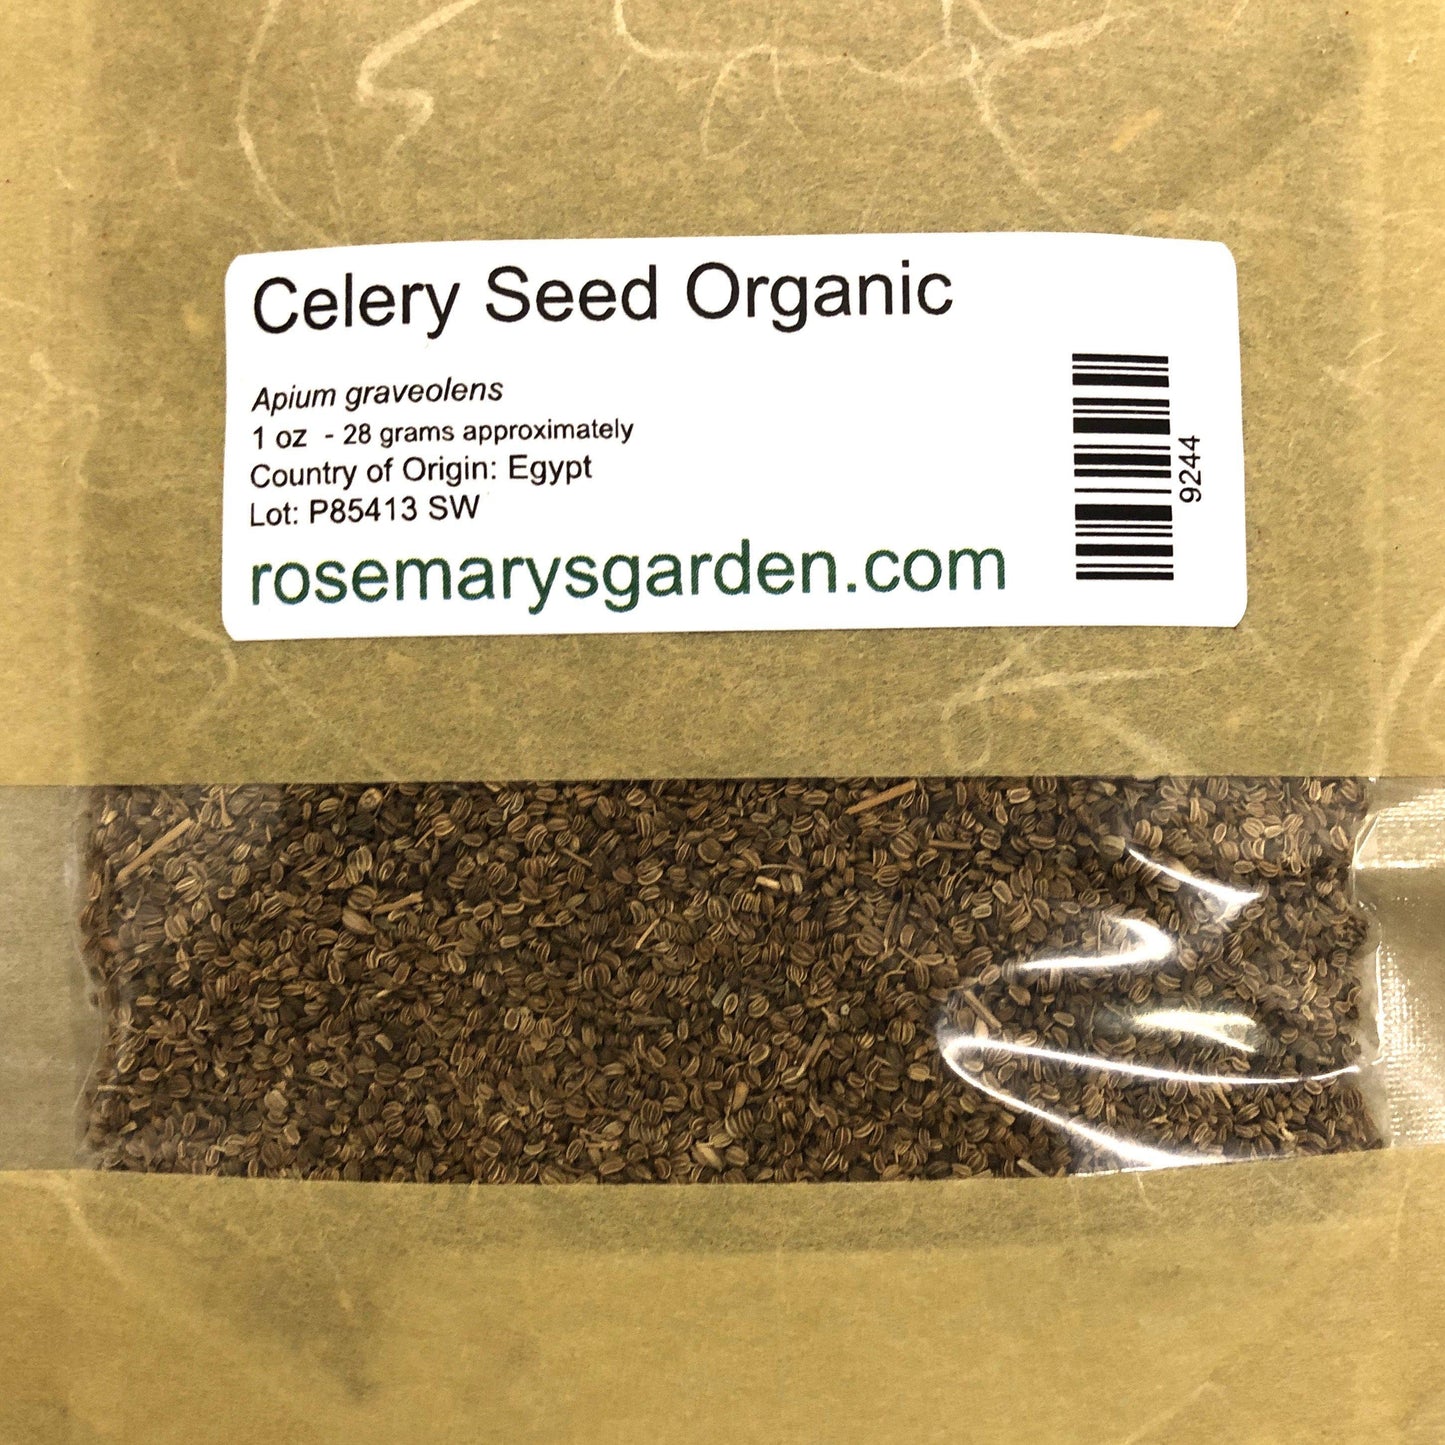 Celery Seed Whole Organic by the oz.